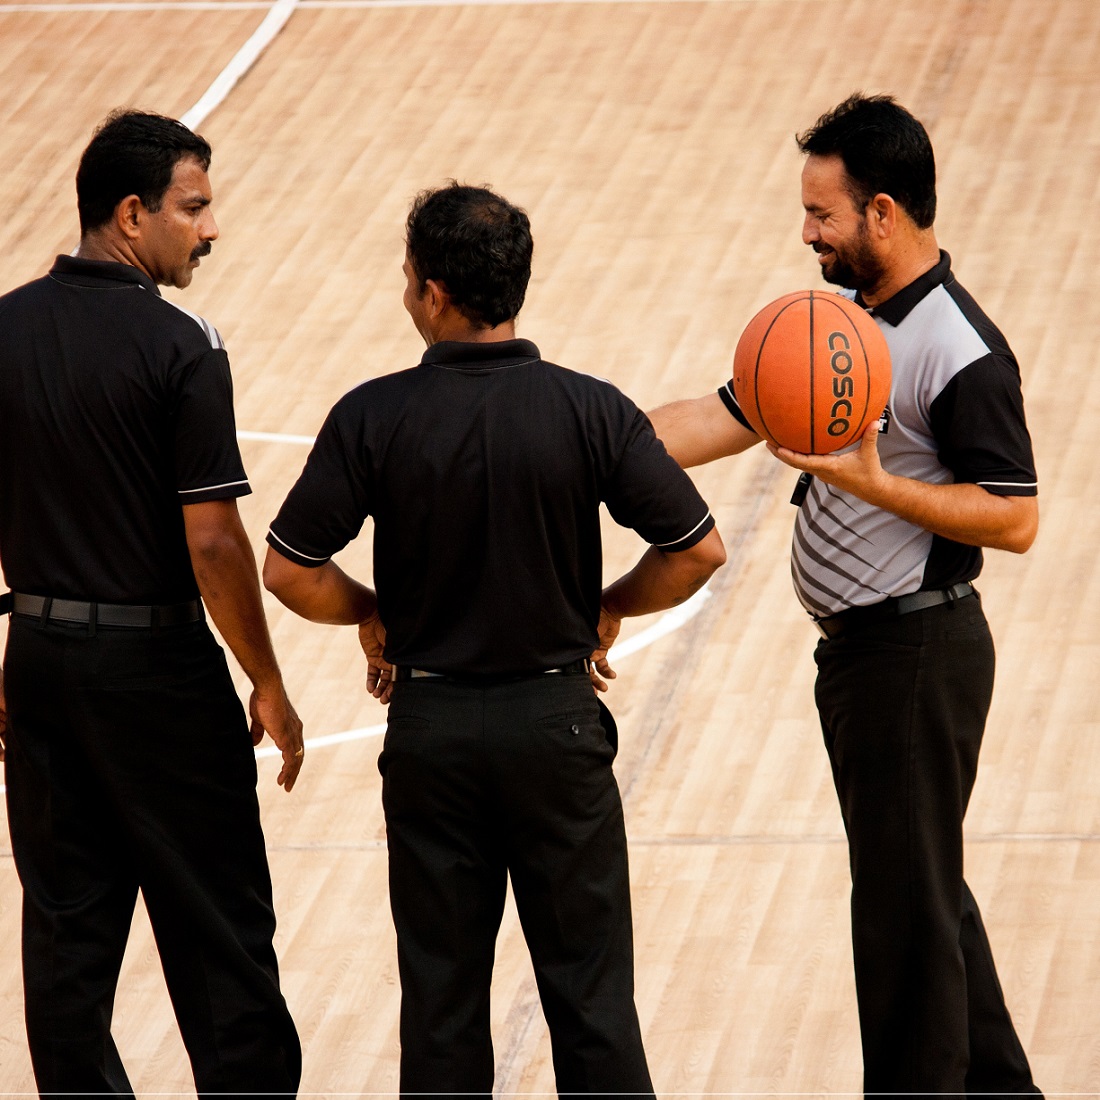 basketball referees on the court square